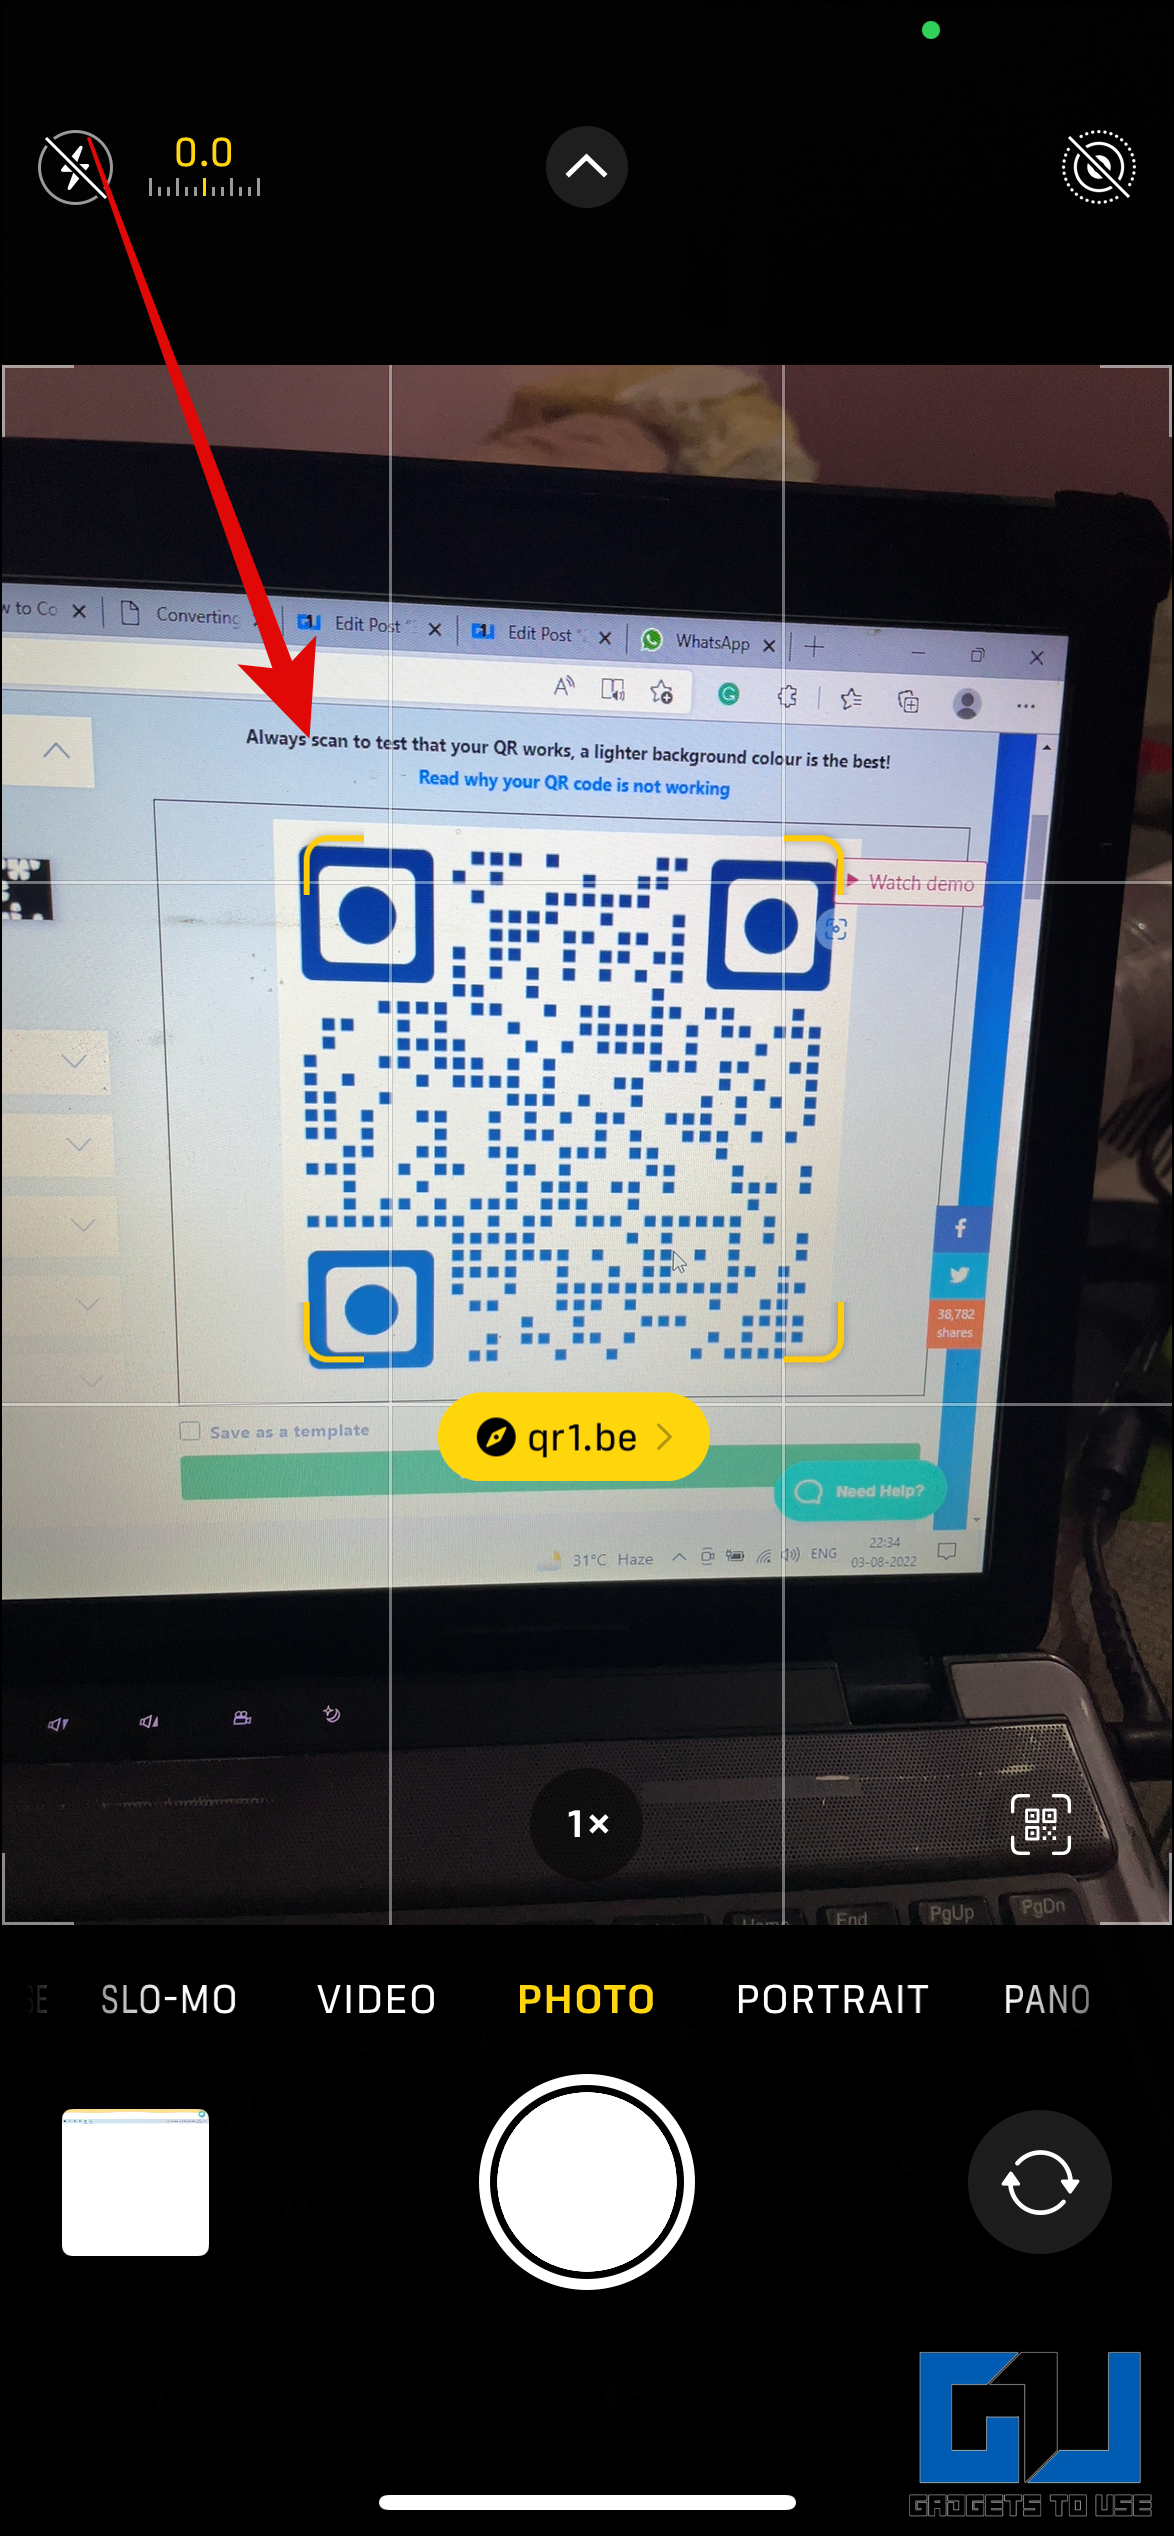 QR code to download files